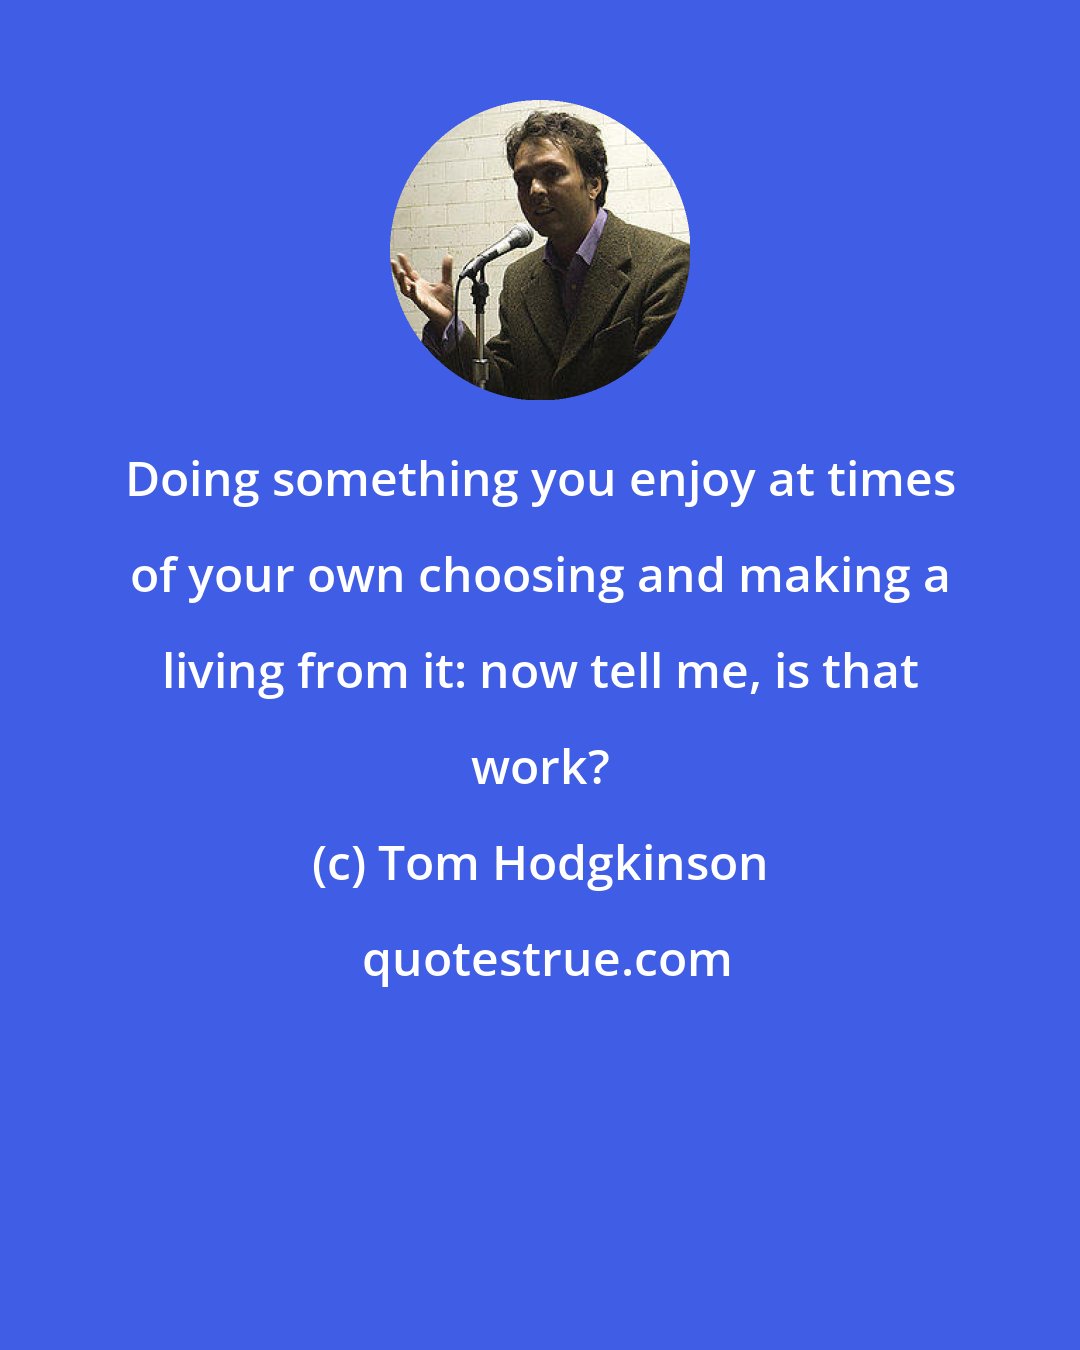 Tom Hodgkinson: Doing something you enjoy at times of your own choosing and making a living from it: now tell me, is that work?